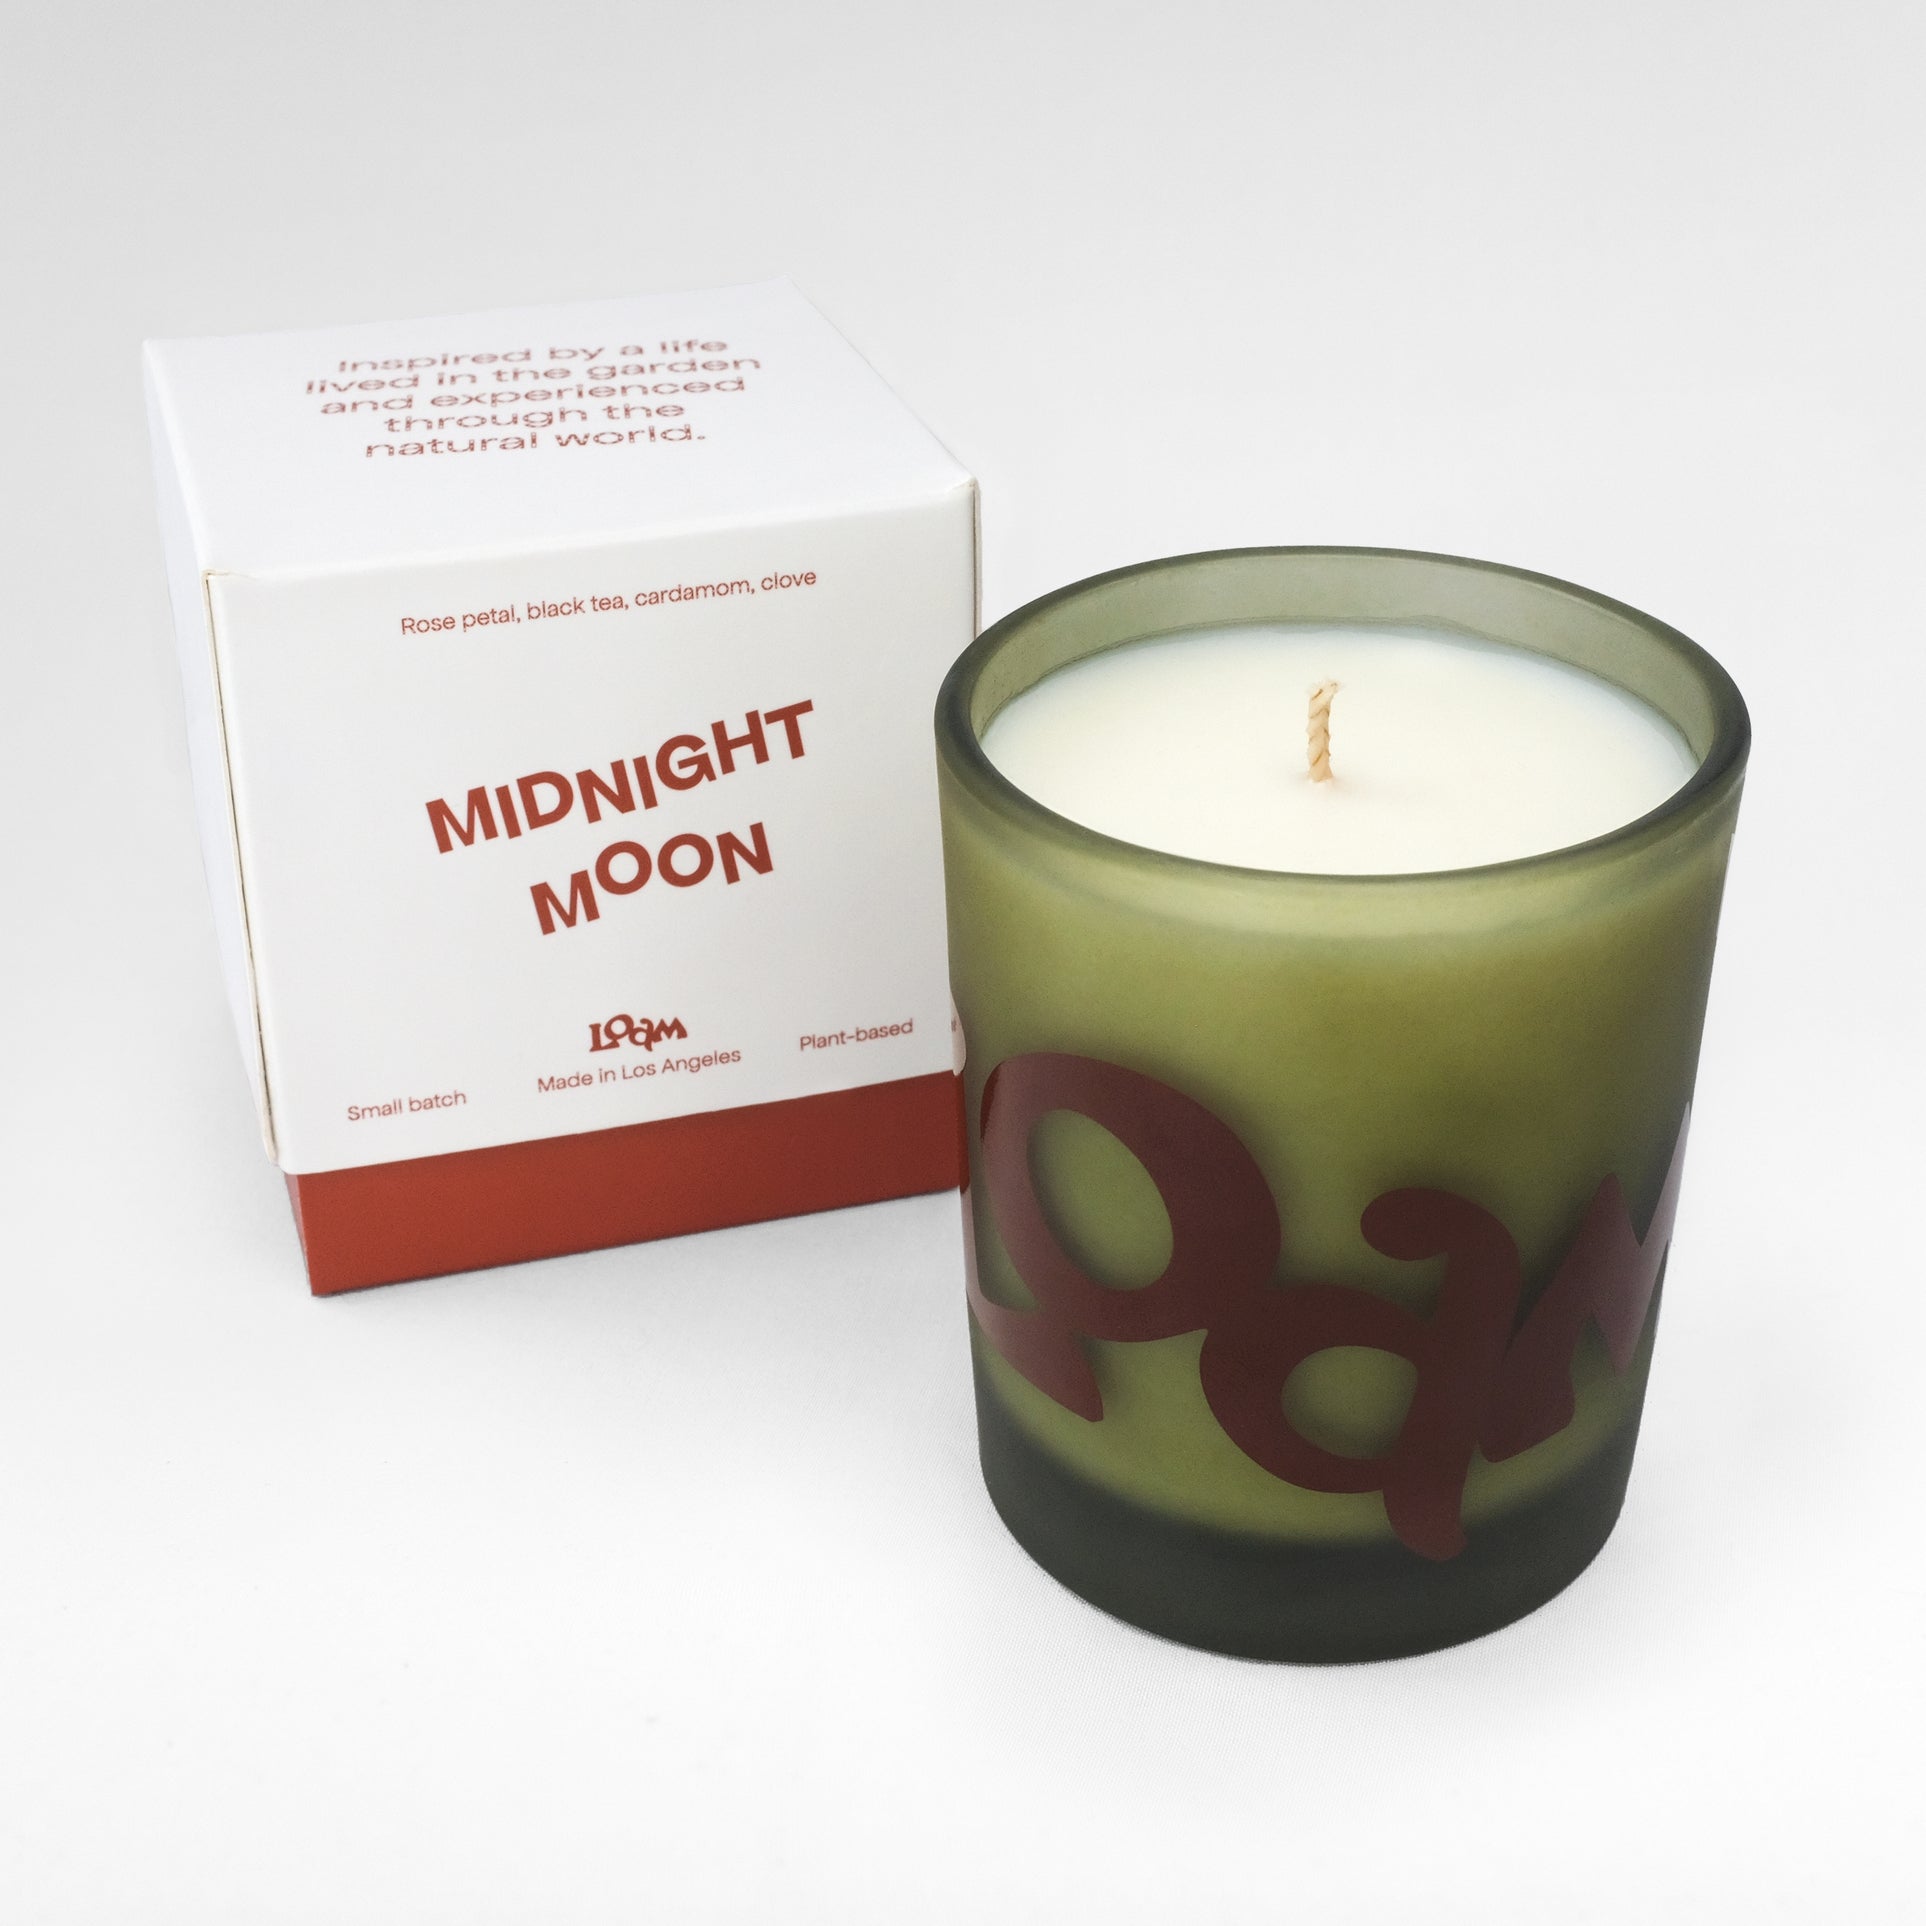 Aromatic cardamom and clove, musky patchouli and oud, and hints of rose make Midnight Moon a scent built for illuminating the long hours of the night. Every candle is crafted in small batches with coconut soy wax and 100% cotton wicks.